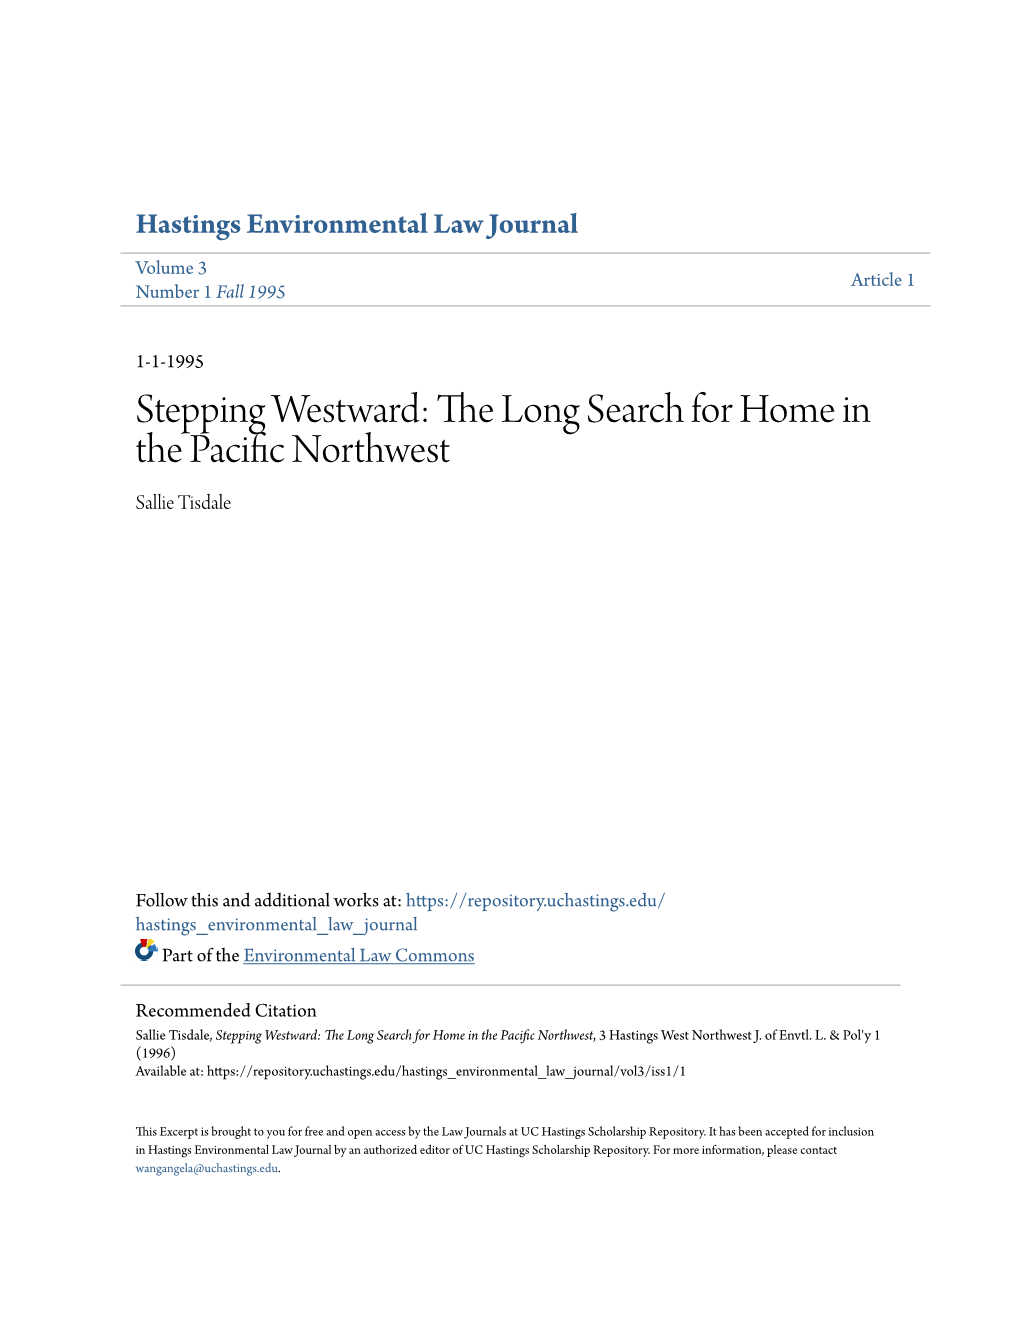 Stepping Westward: the Long Search for Home in the Pacific Orn Thwest Sallie Tisdale